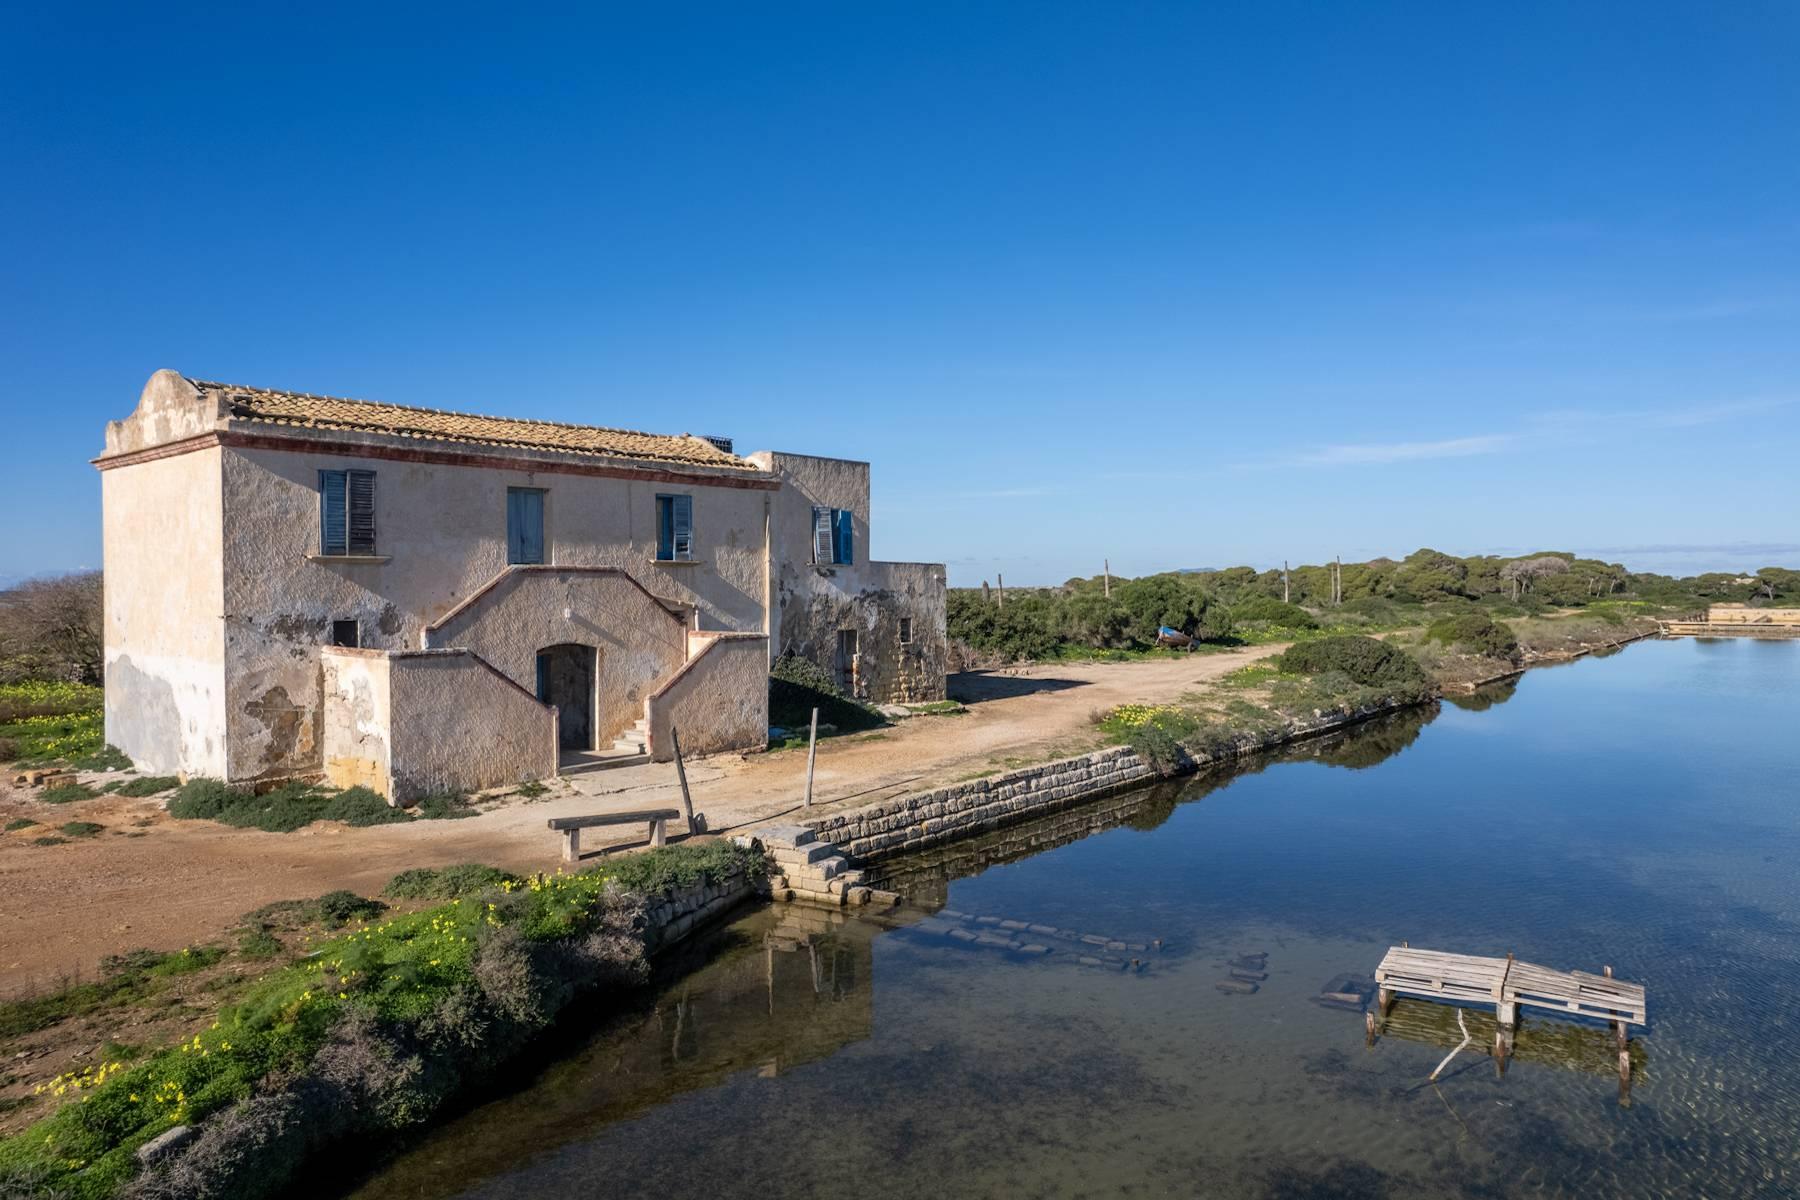 Pied dan s l'eau historic residence on Isola Lunga with private landing stage - 11